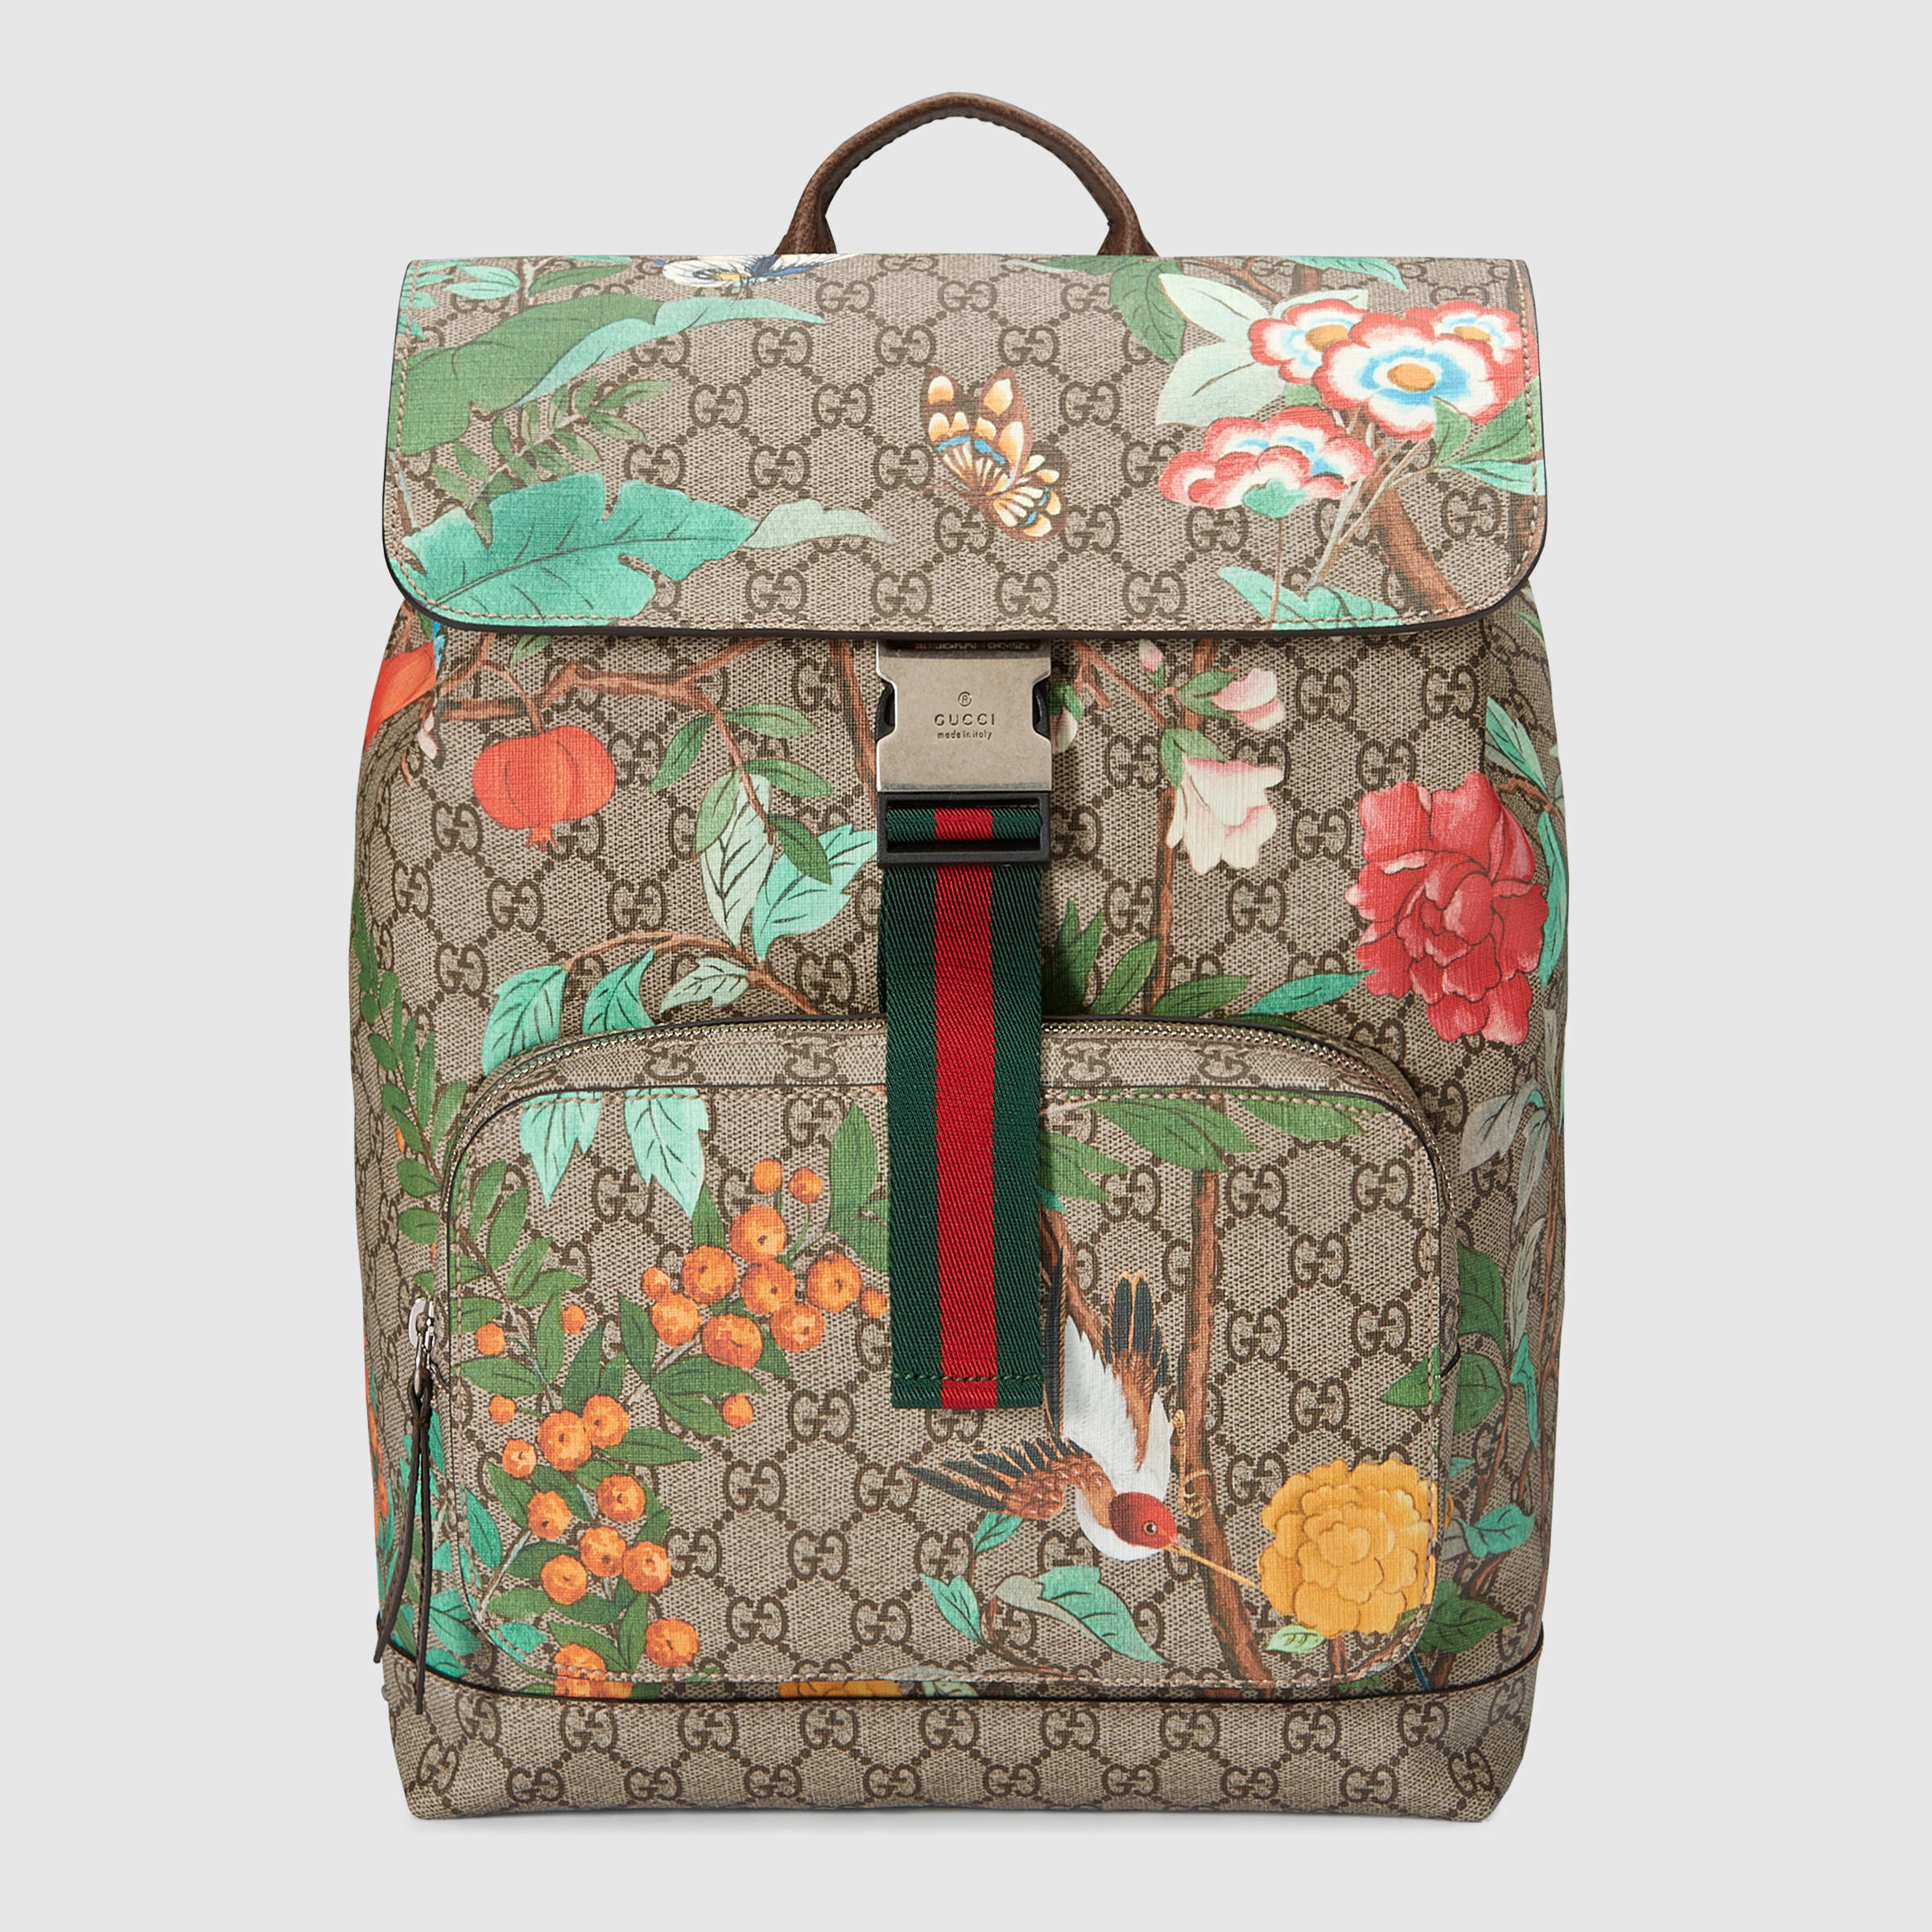 Gucci Tian Gg Supreme Backpack in Multicolor | Lyst